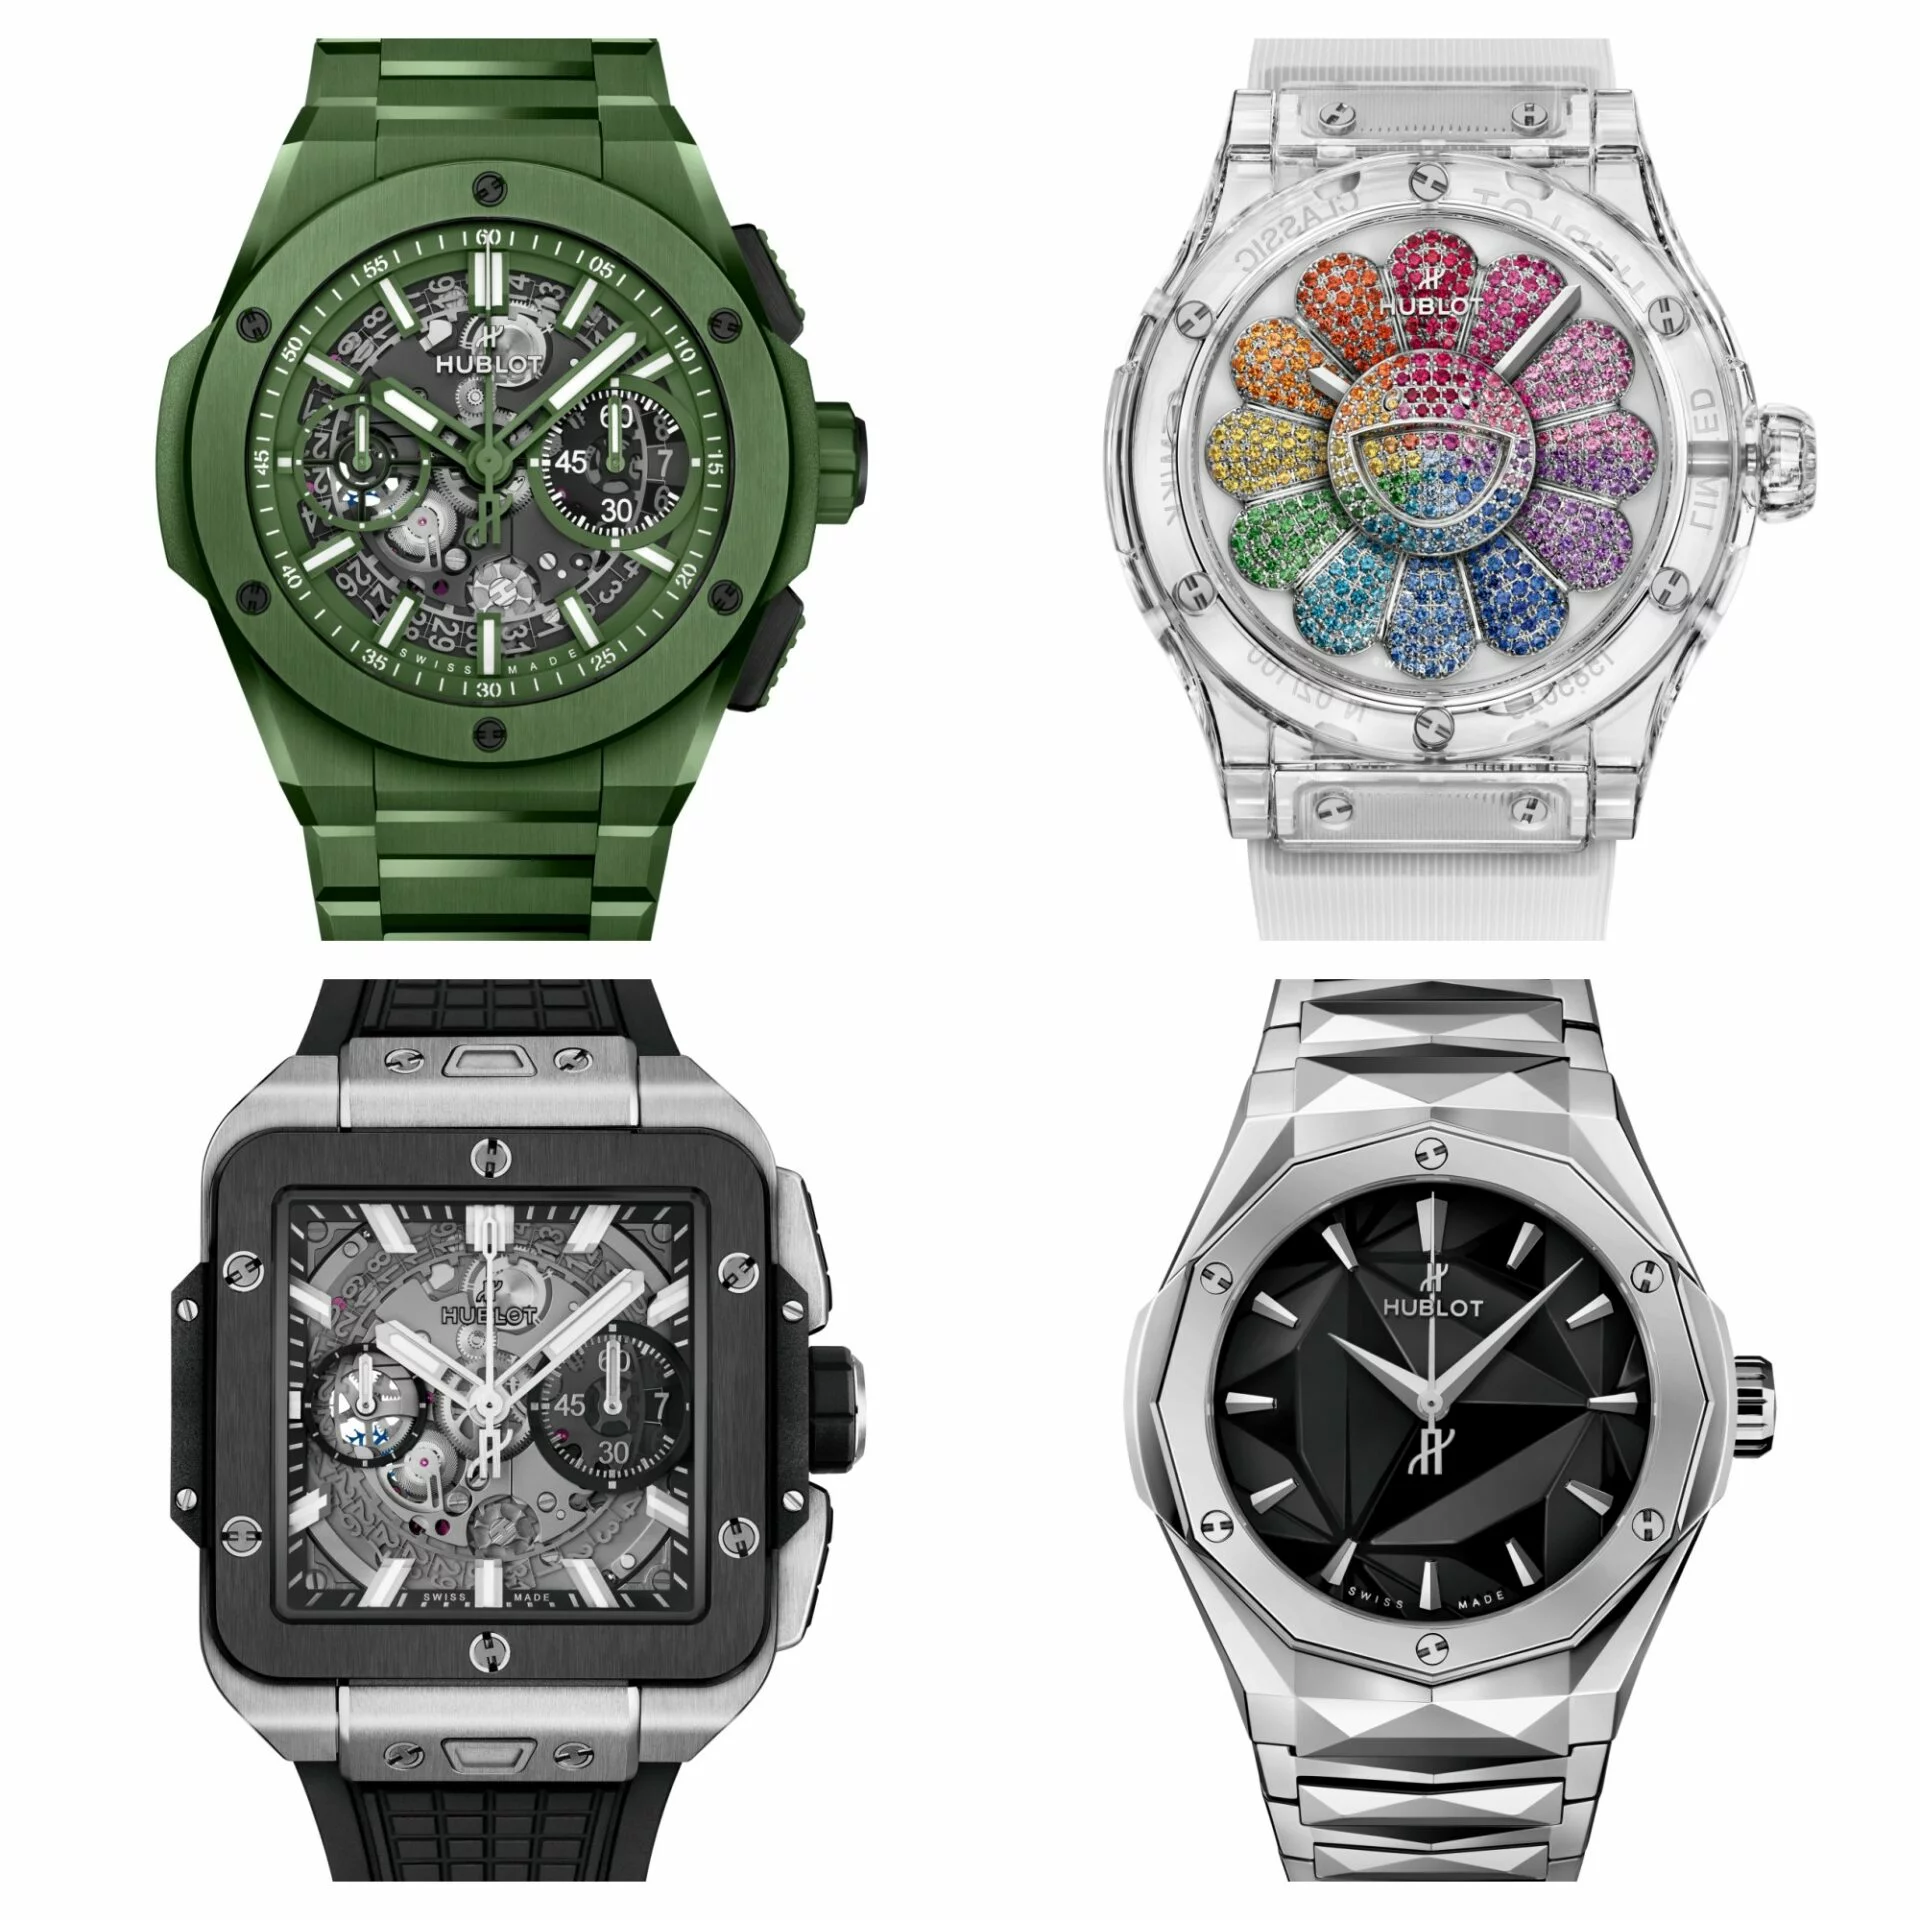 Watches and Wonders 2022: Hublot delivers new colourful ceramic timepieces